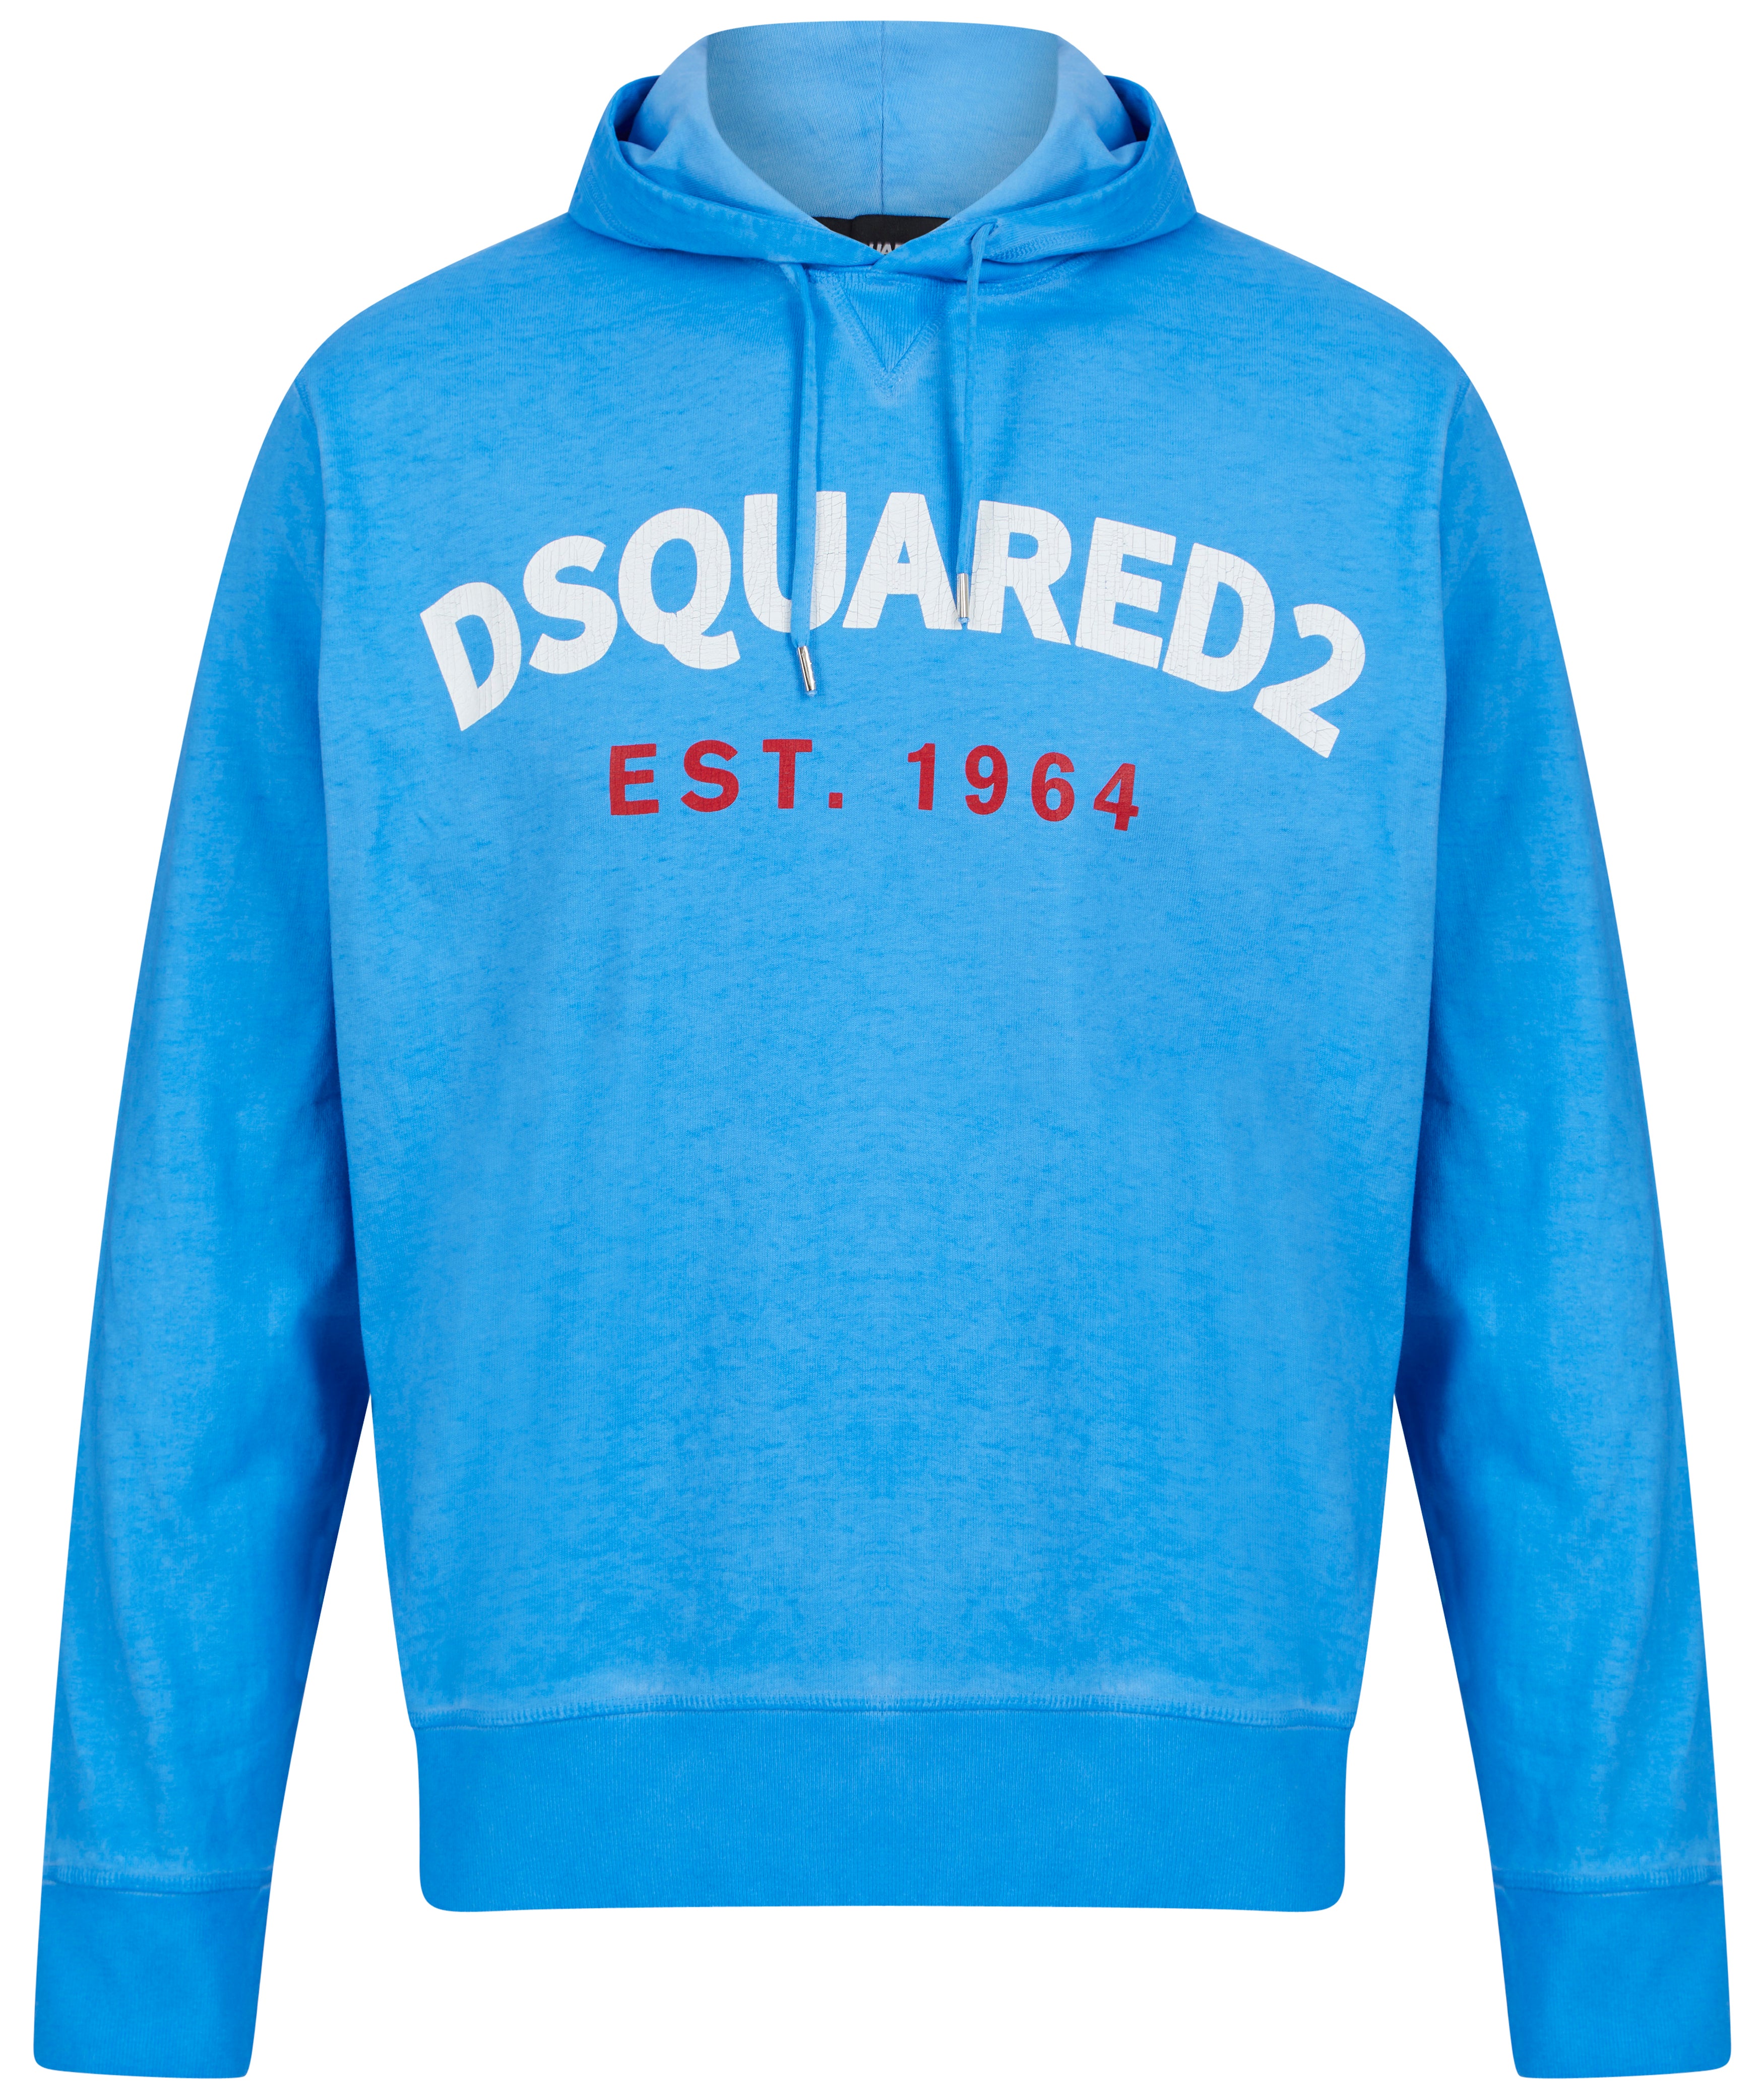 Load image into Gallery viewer, DSquared2 Est 1964 Hoody Blue
